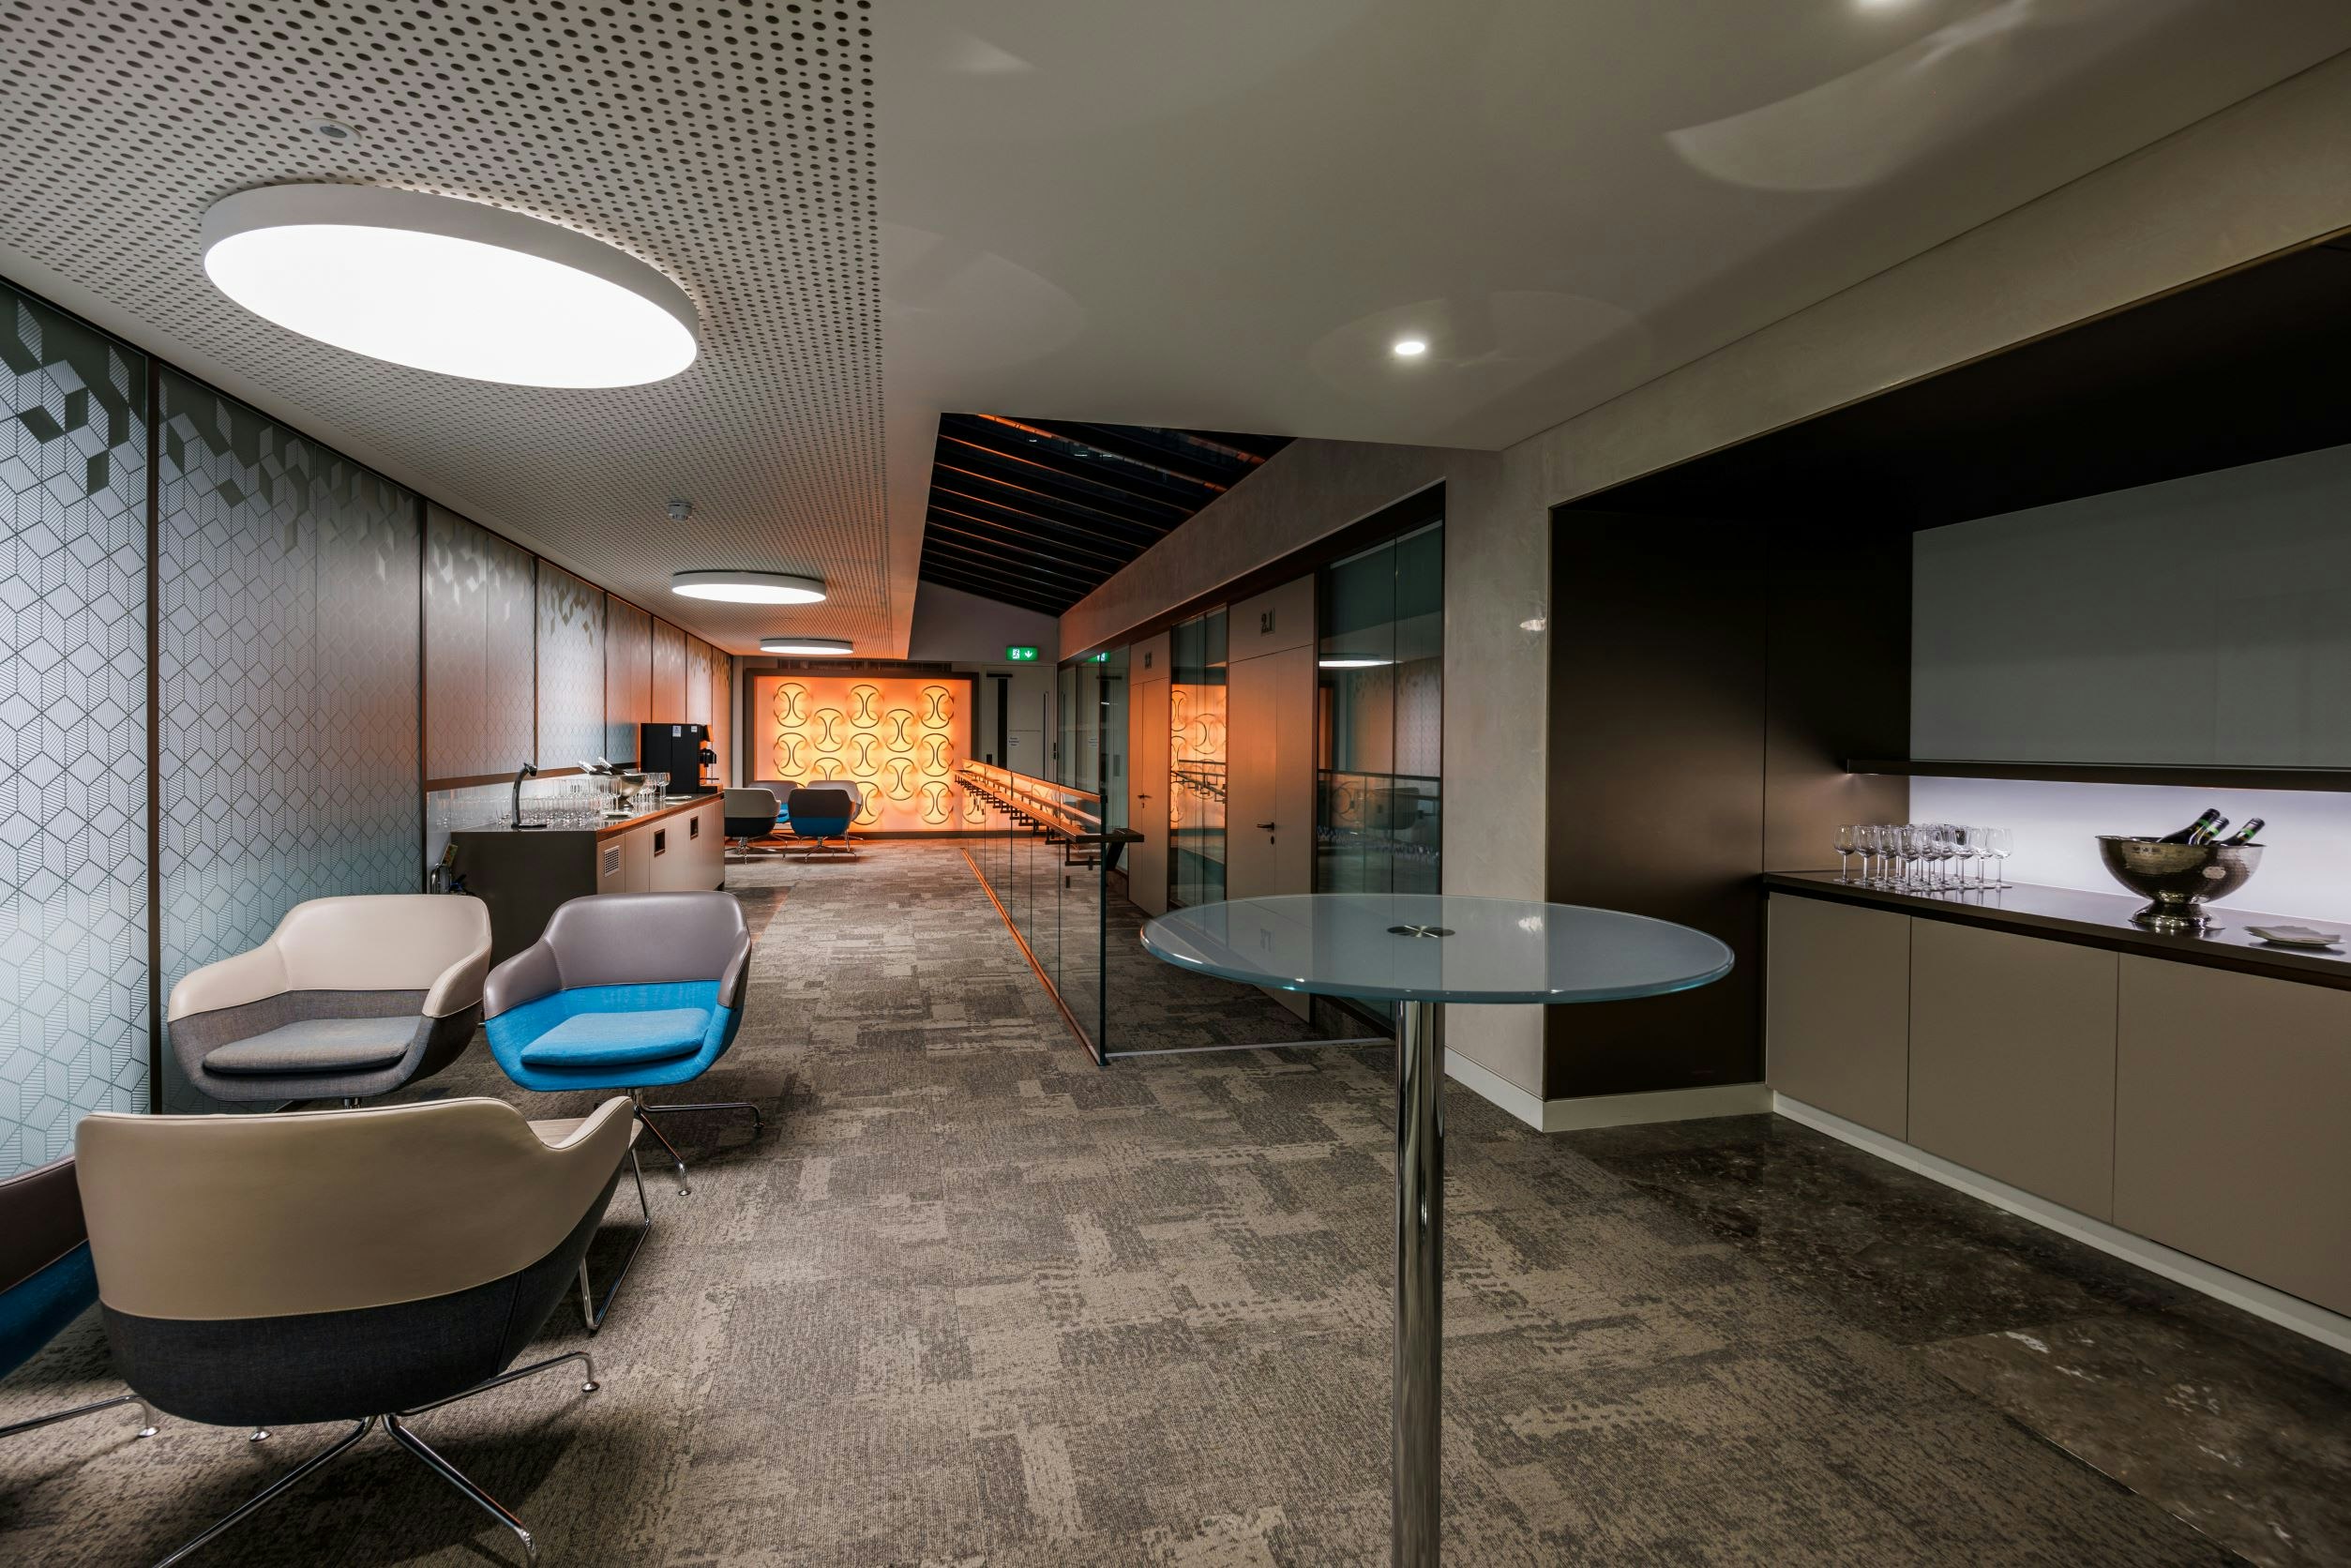 One Moorgate Place - Auditorium and Lounge image 7